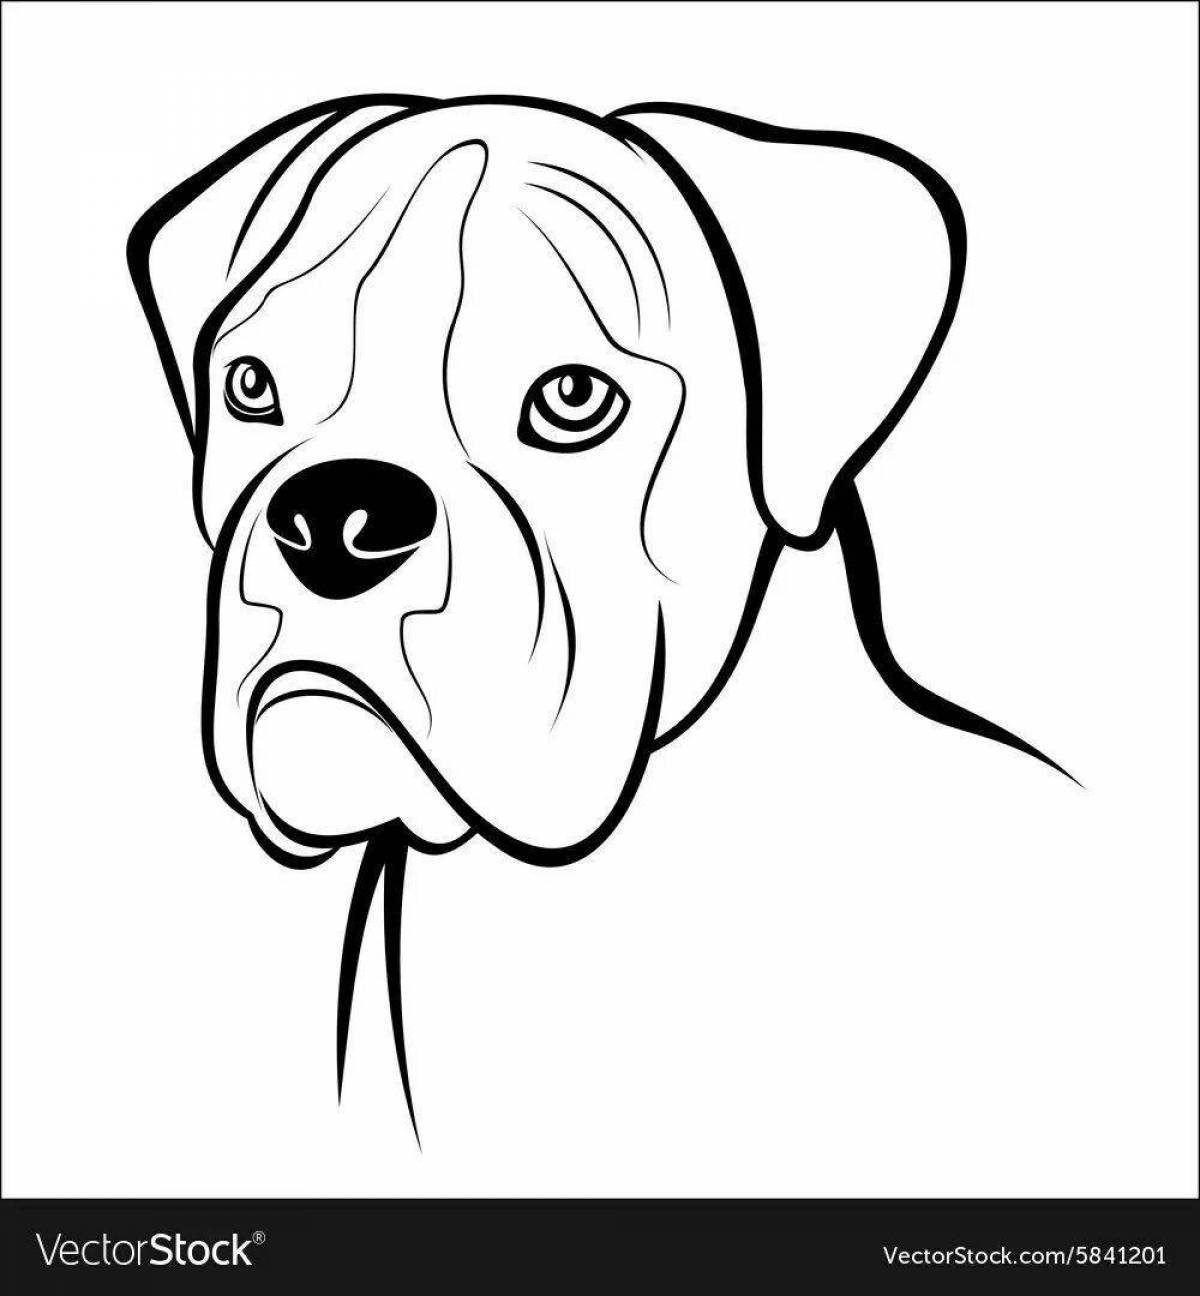 Coloring page energetic boxer